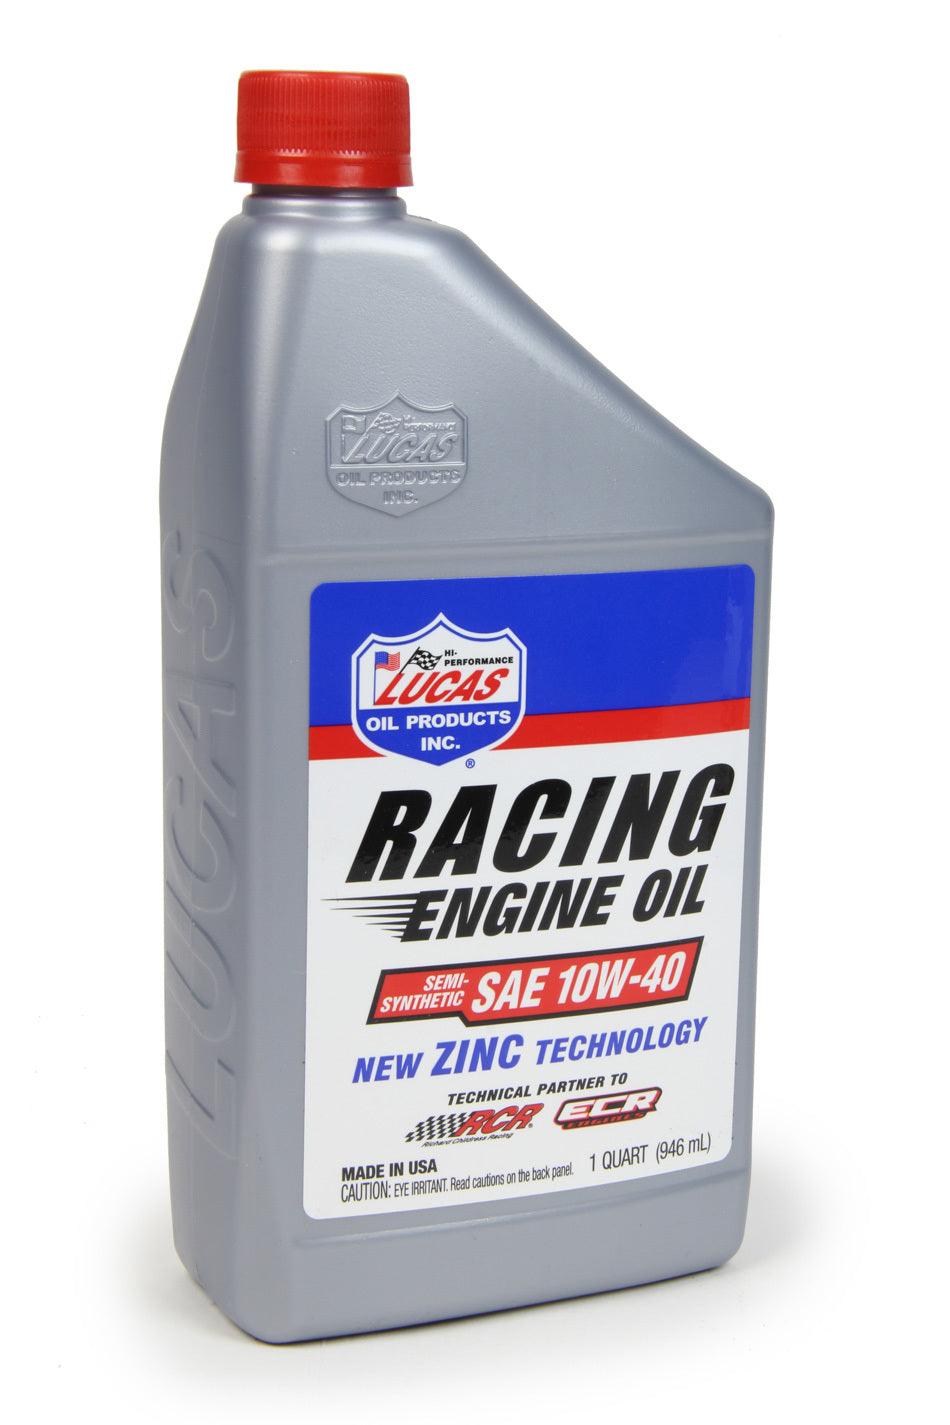 10w40 Semi Synthetic Racing Oil 1 Quart - Burlile Performance Products